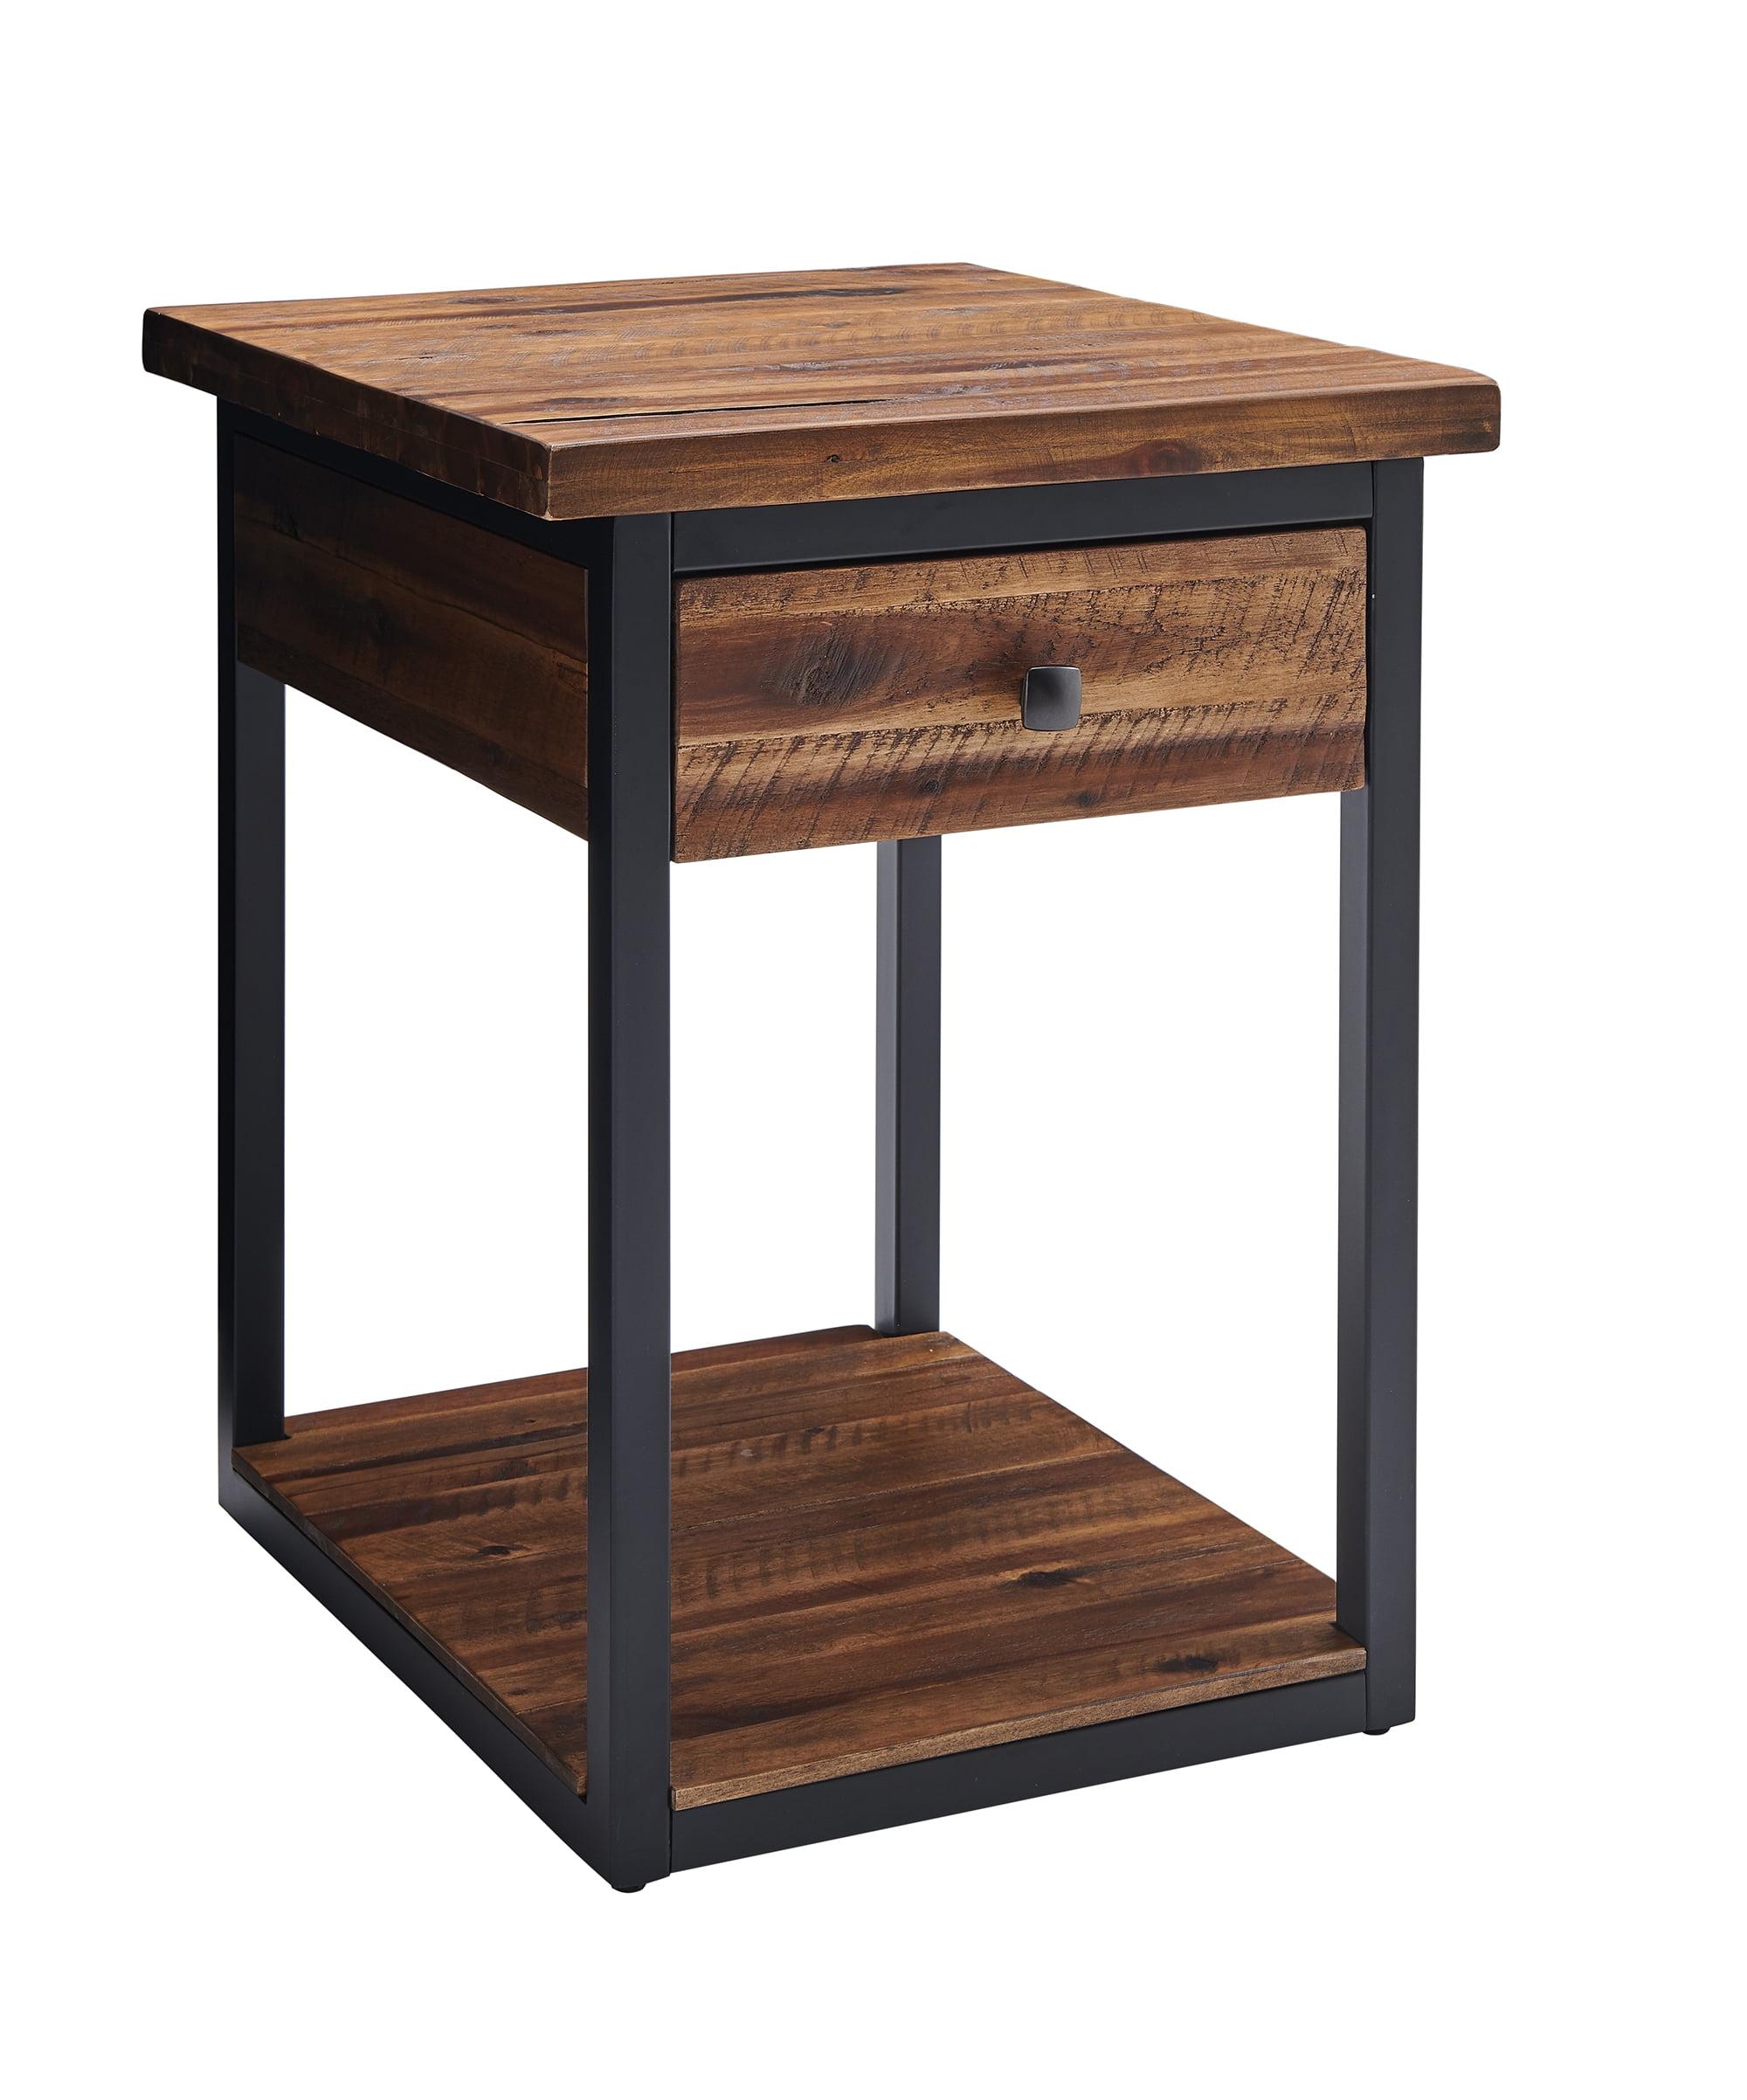 Claremont Rustic Square Wood & Metal End Table with Storage